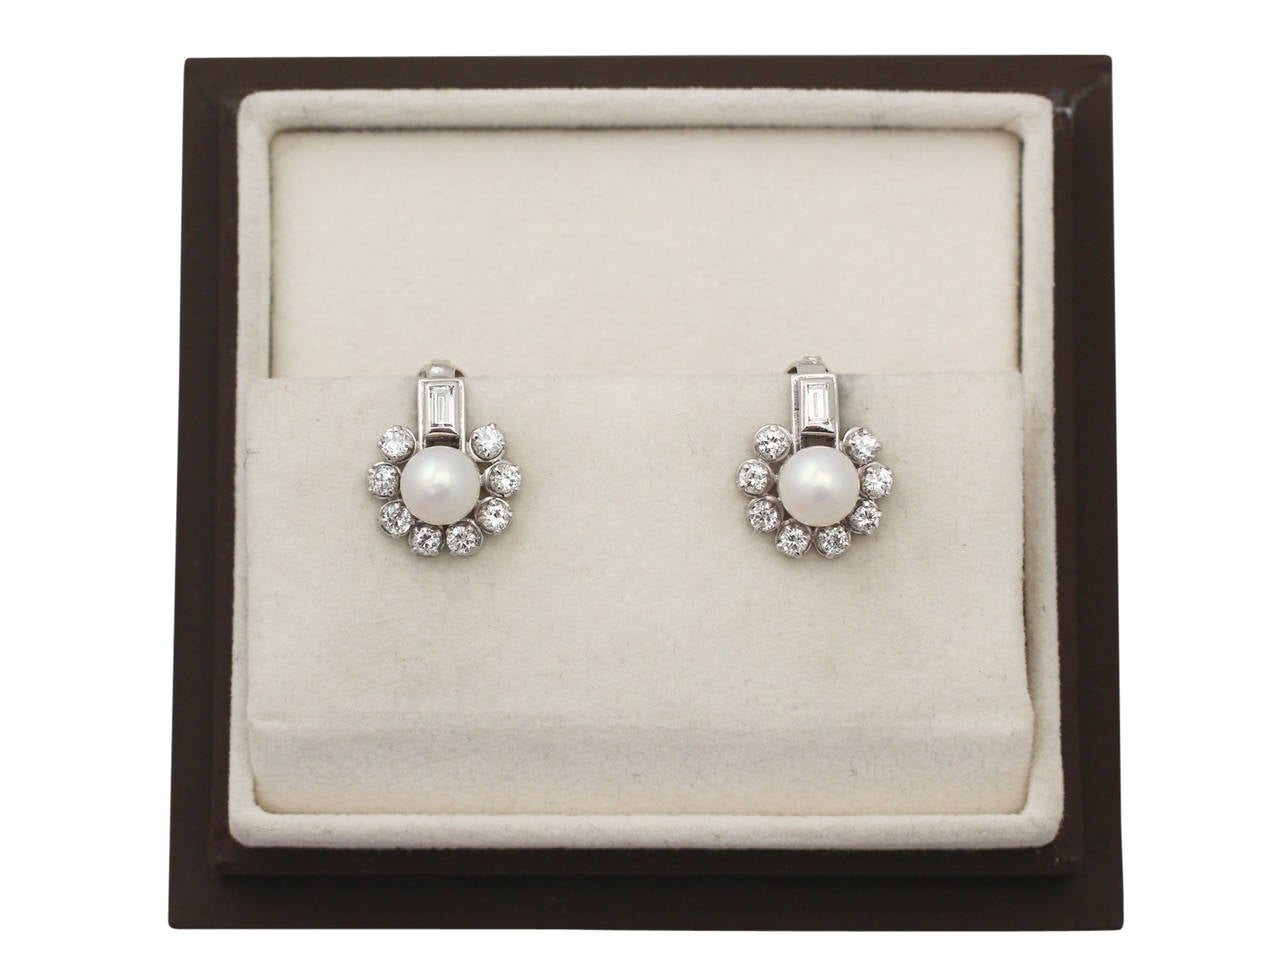 Vintage 1.04 ct Diamond and Pearl White Gold Stud Earrings 3